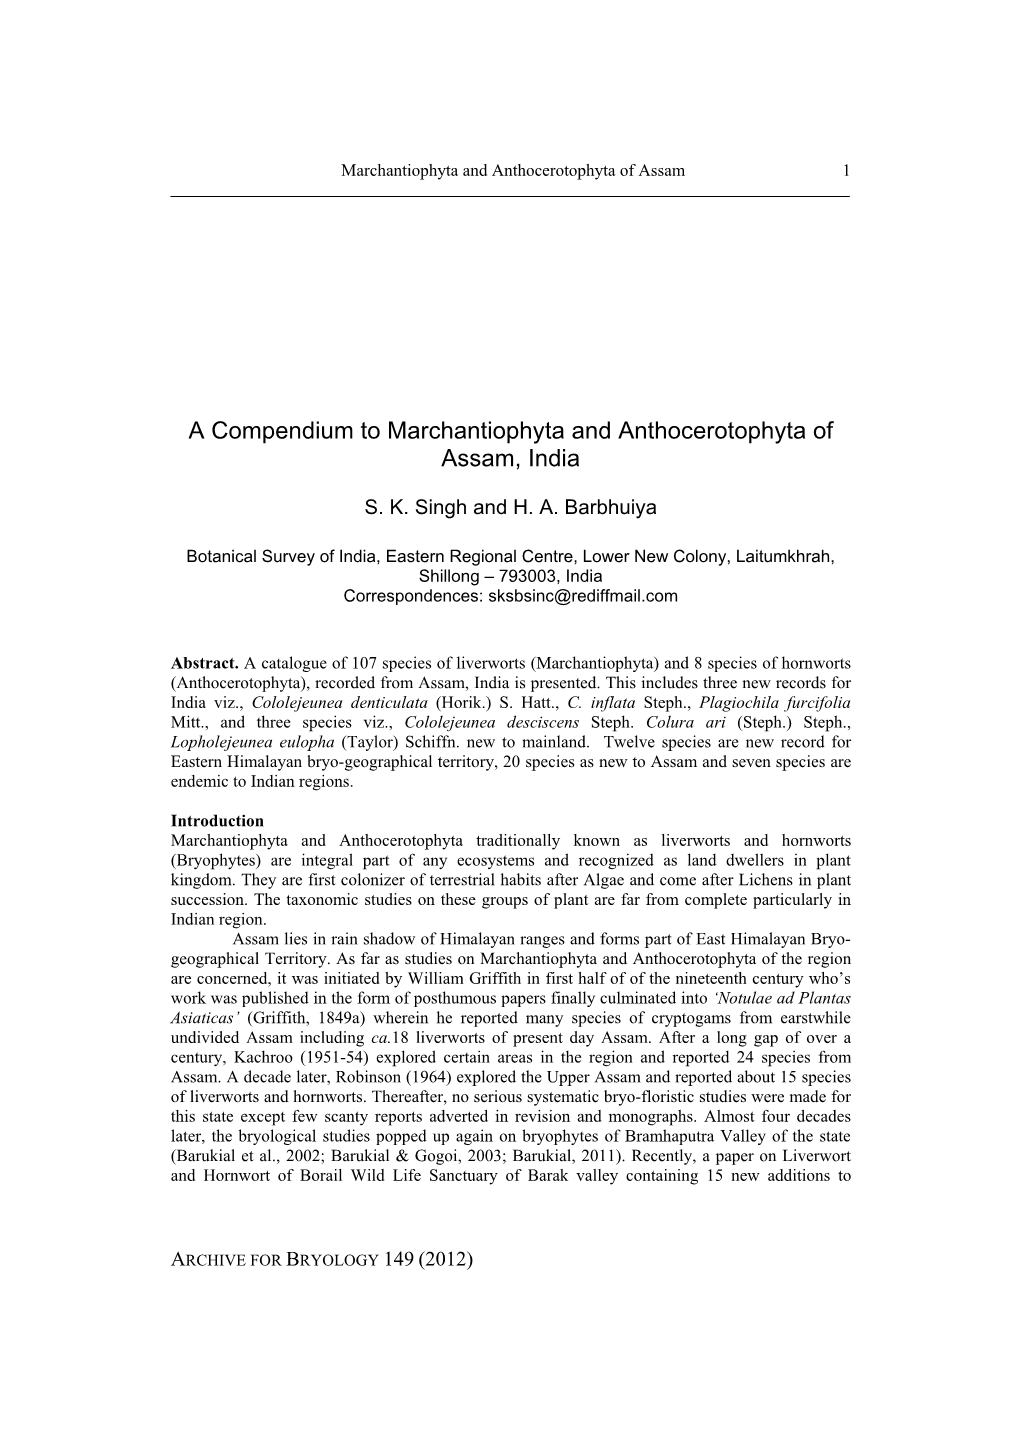 A Compendium to Marchantiophyta and Anthocerotophyta of Assam, India